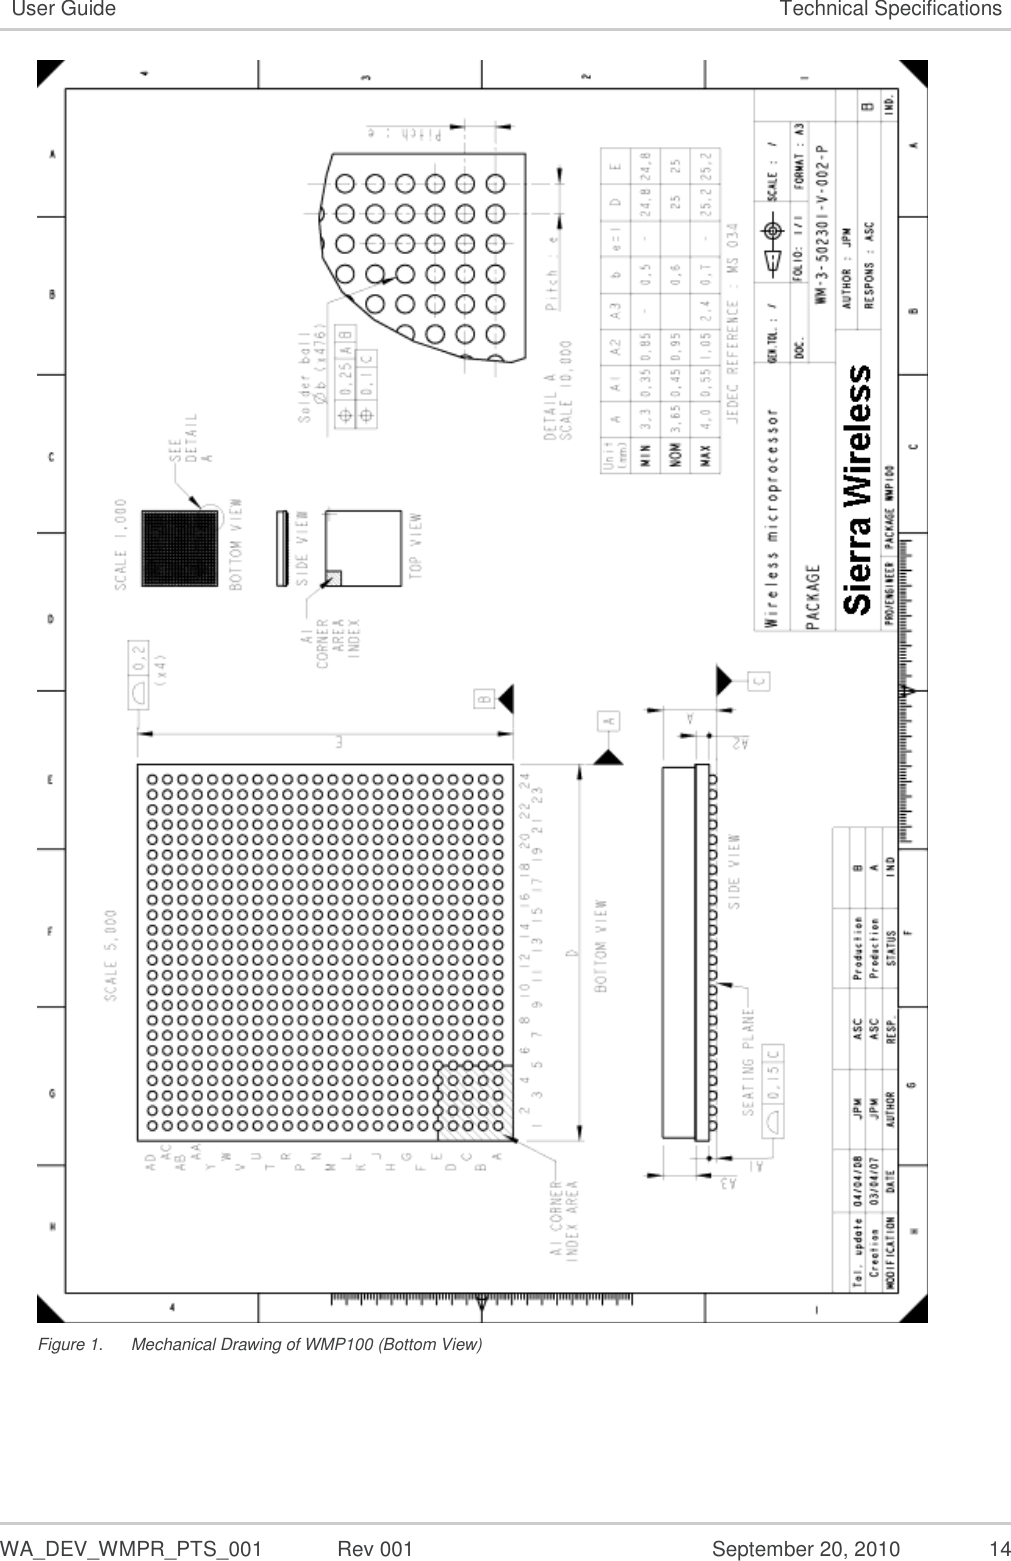   WA_DEV_WMPR_PTS_001  Rev 001  September 20, 2010  14 User Guide Technical Specifications  Figure 1.  Mechanical Drawing of WMP100 (Bottom View) 